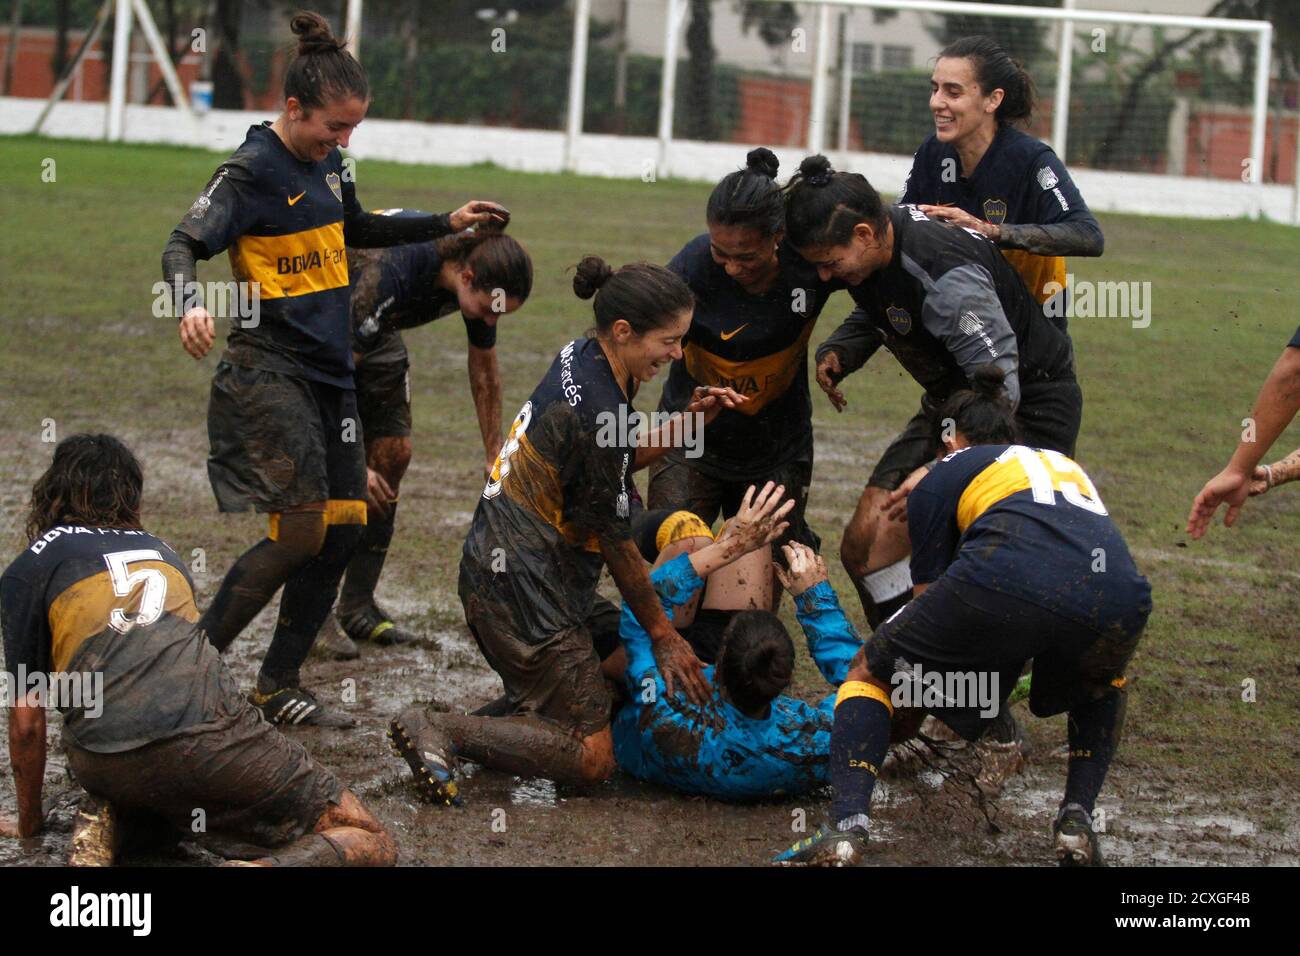 Players from Boca Juniors women's soccer club celebrate after beating  Excursionistas to win their third league championship title in Buenos Aires  May 11, 2014. Long on the soccer sidelines, more and more